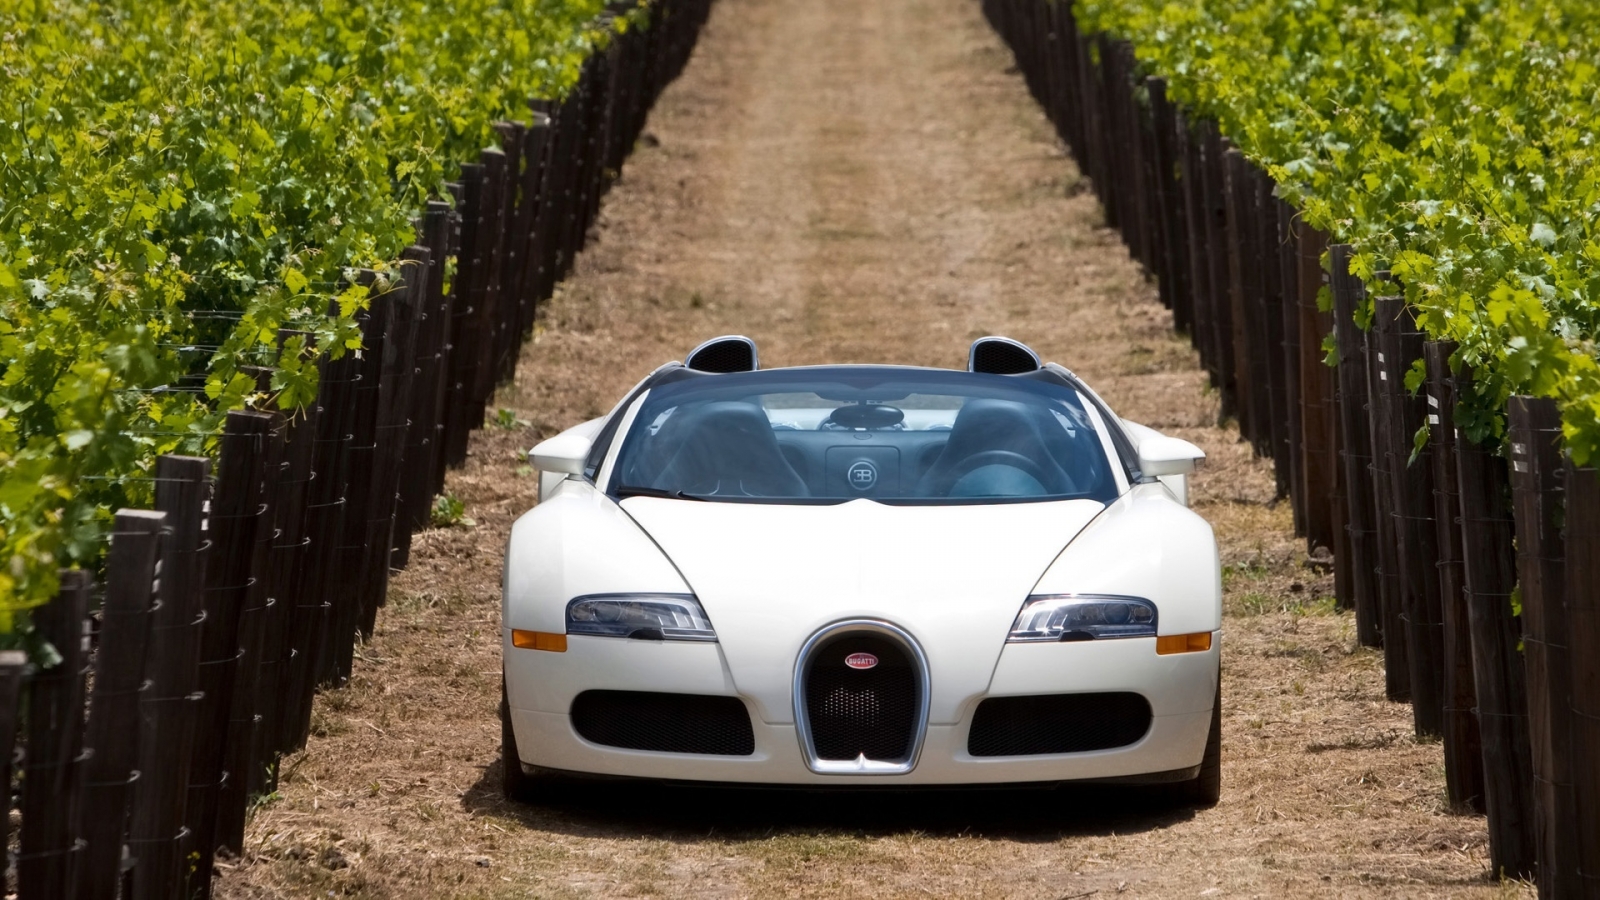 Bugatti Veyron 16.4 Grand Sport 2010 in Napa Valley - Front 3 for 1600 x 900 HDTV resolution